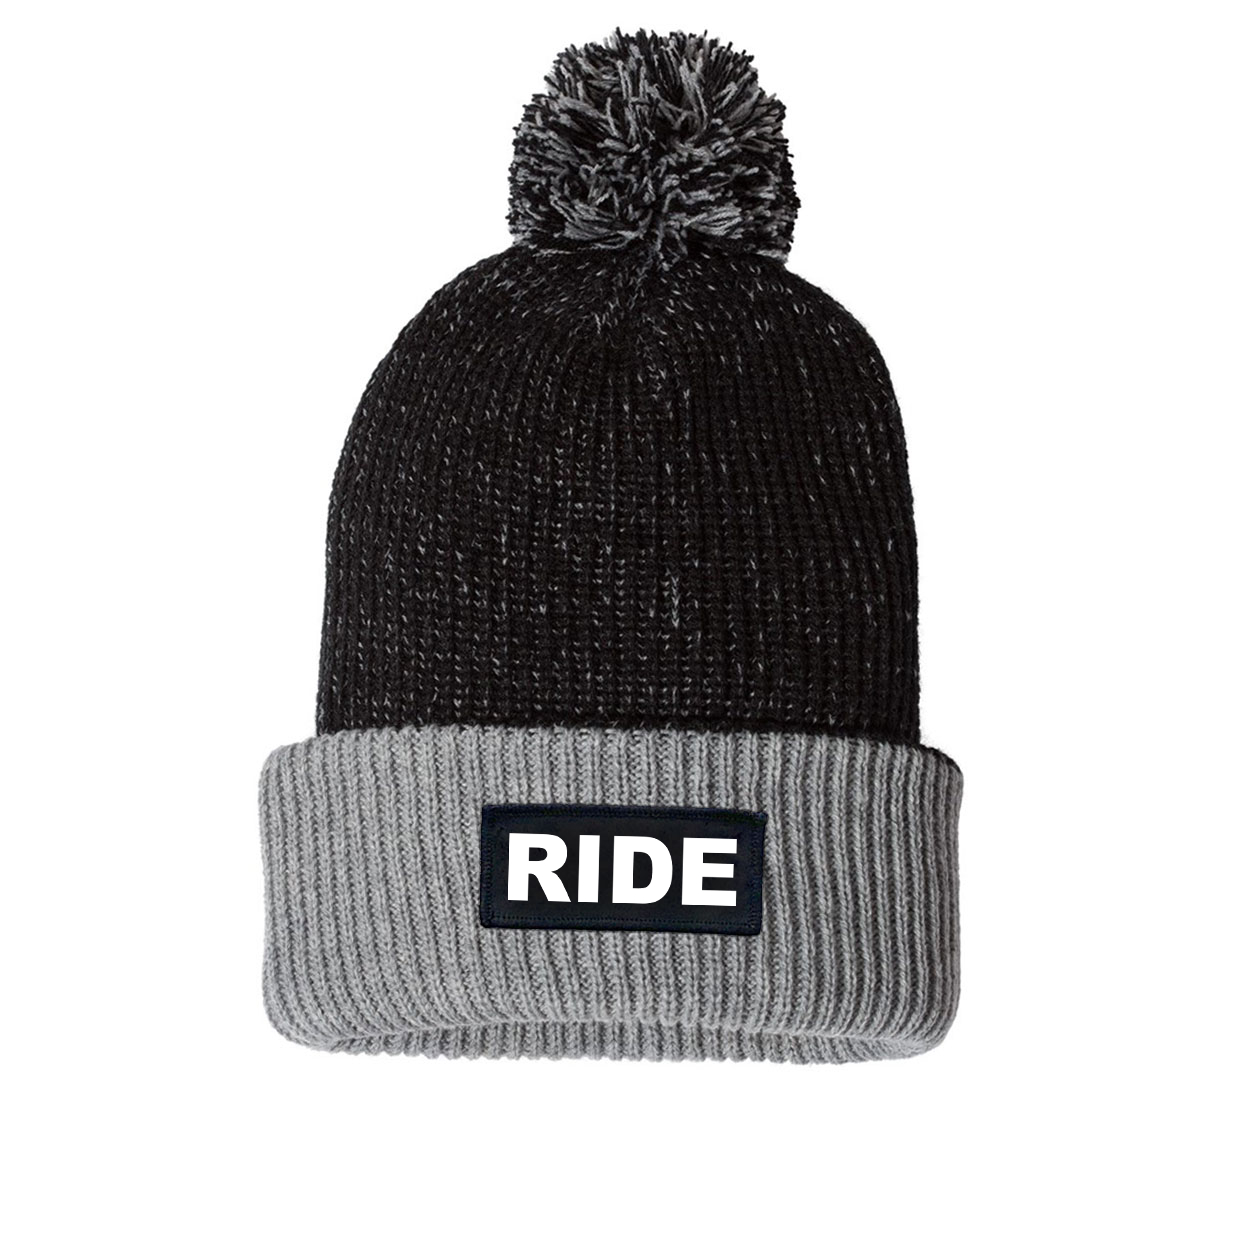 Ride Brand Logo Night Out Woven Patch Roll Up Pom Knit Beanie Black/Gray (White Logo)